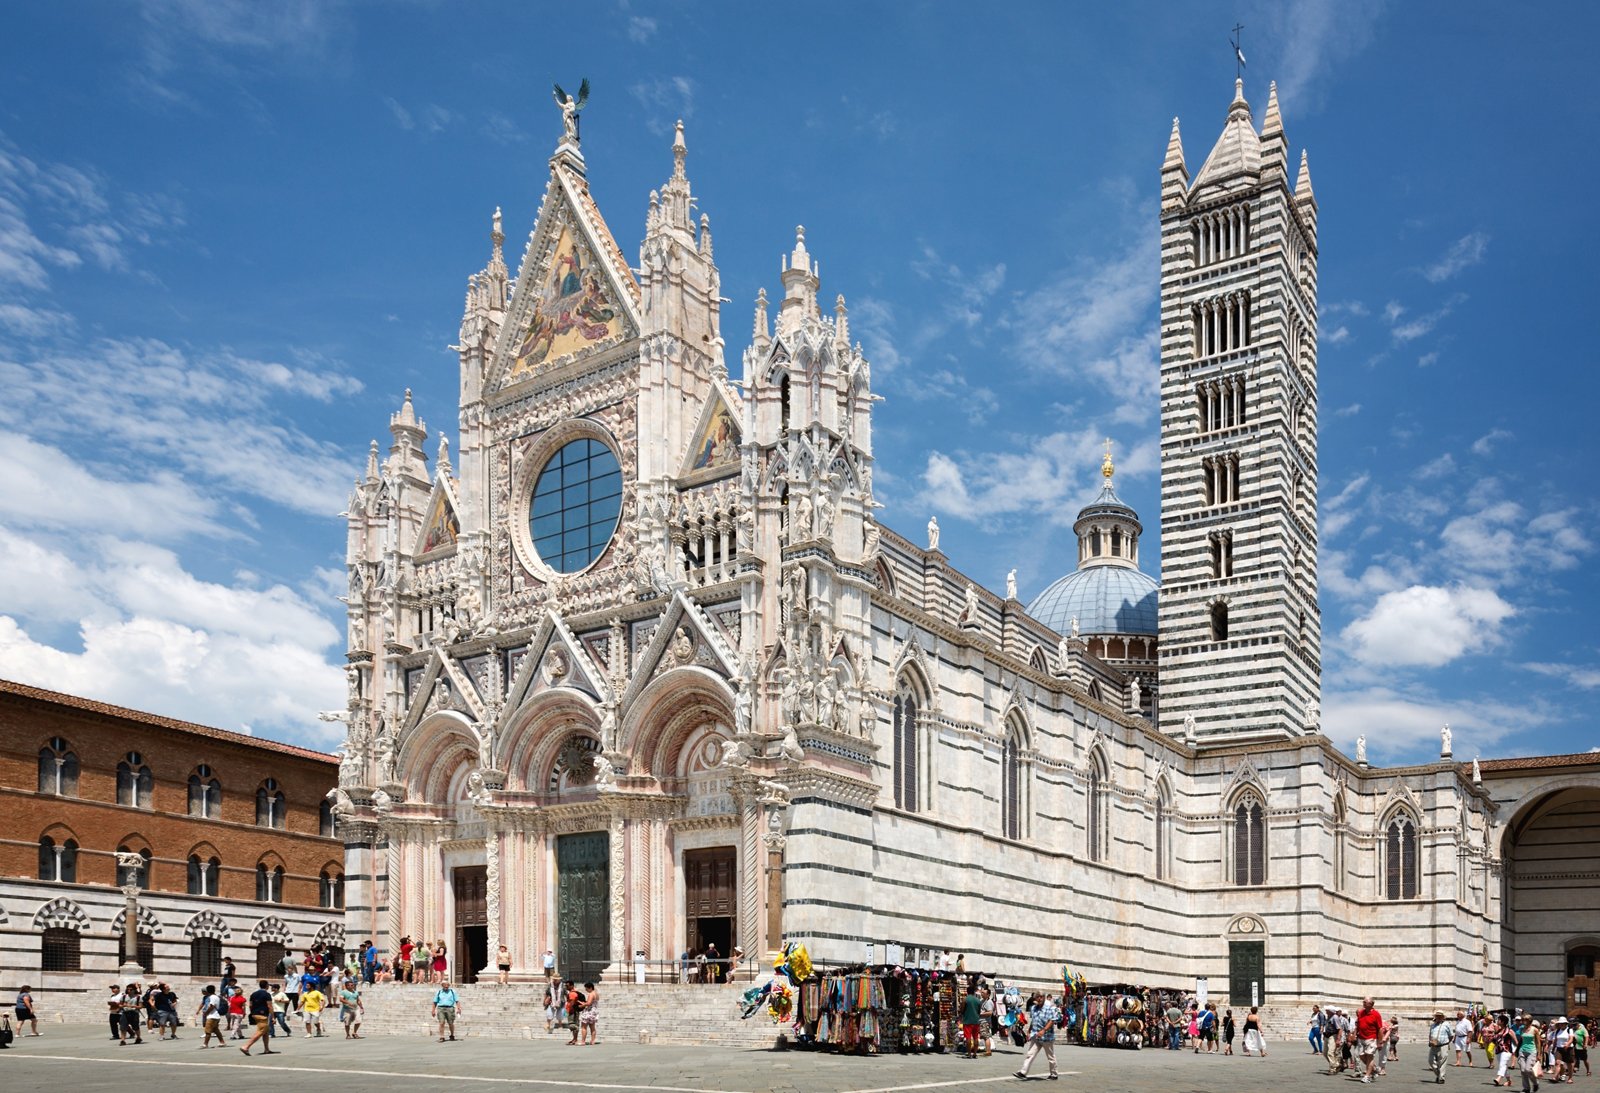 The distinctive black and white stripes of Siena's Gothic cathedral